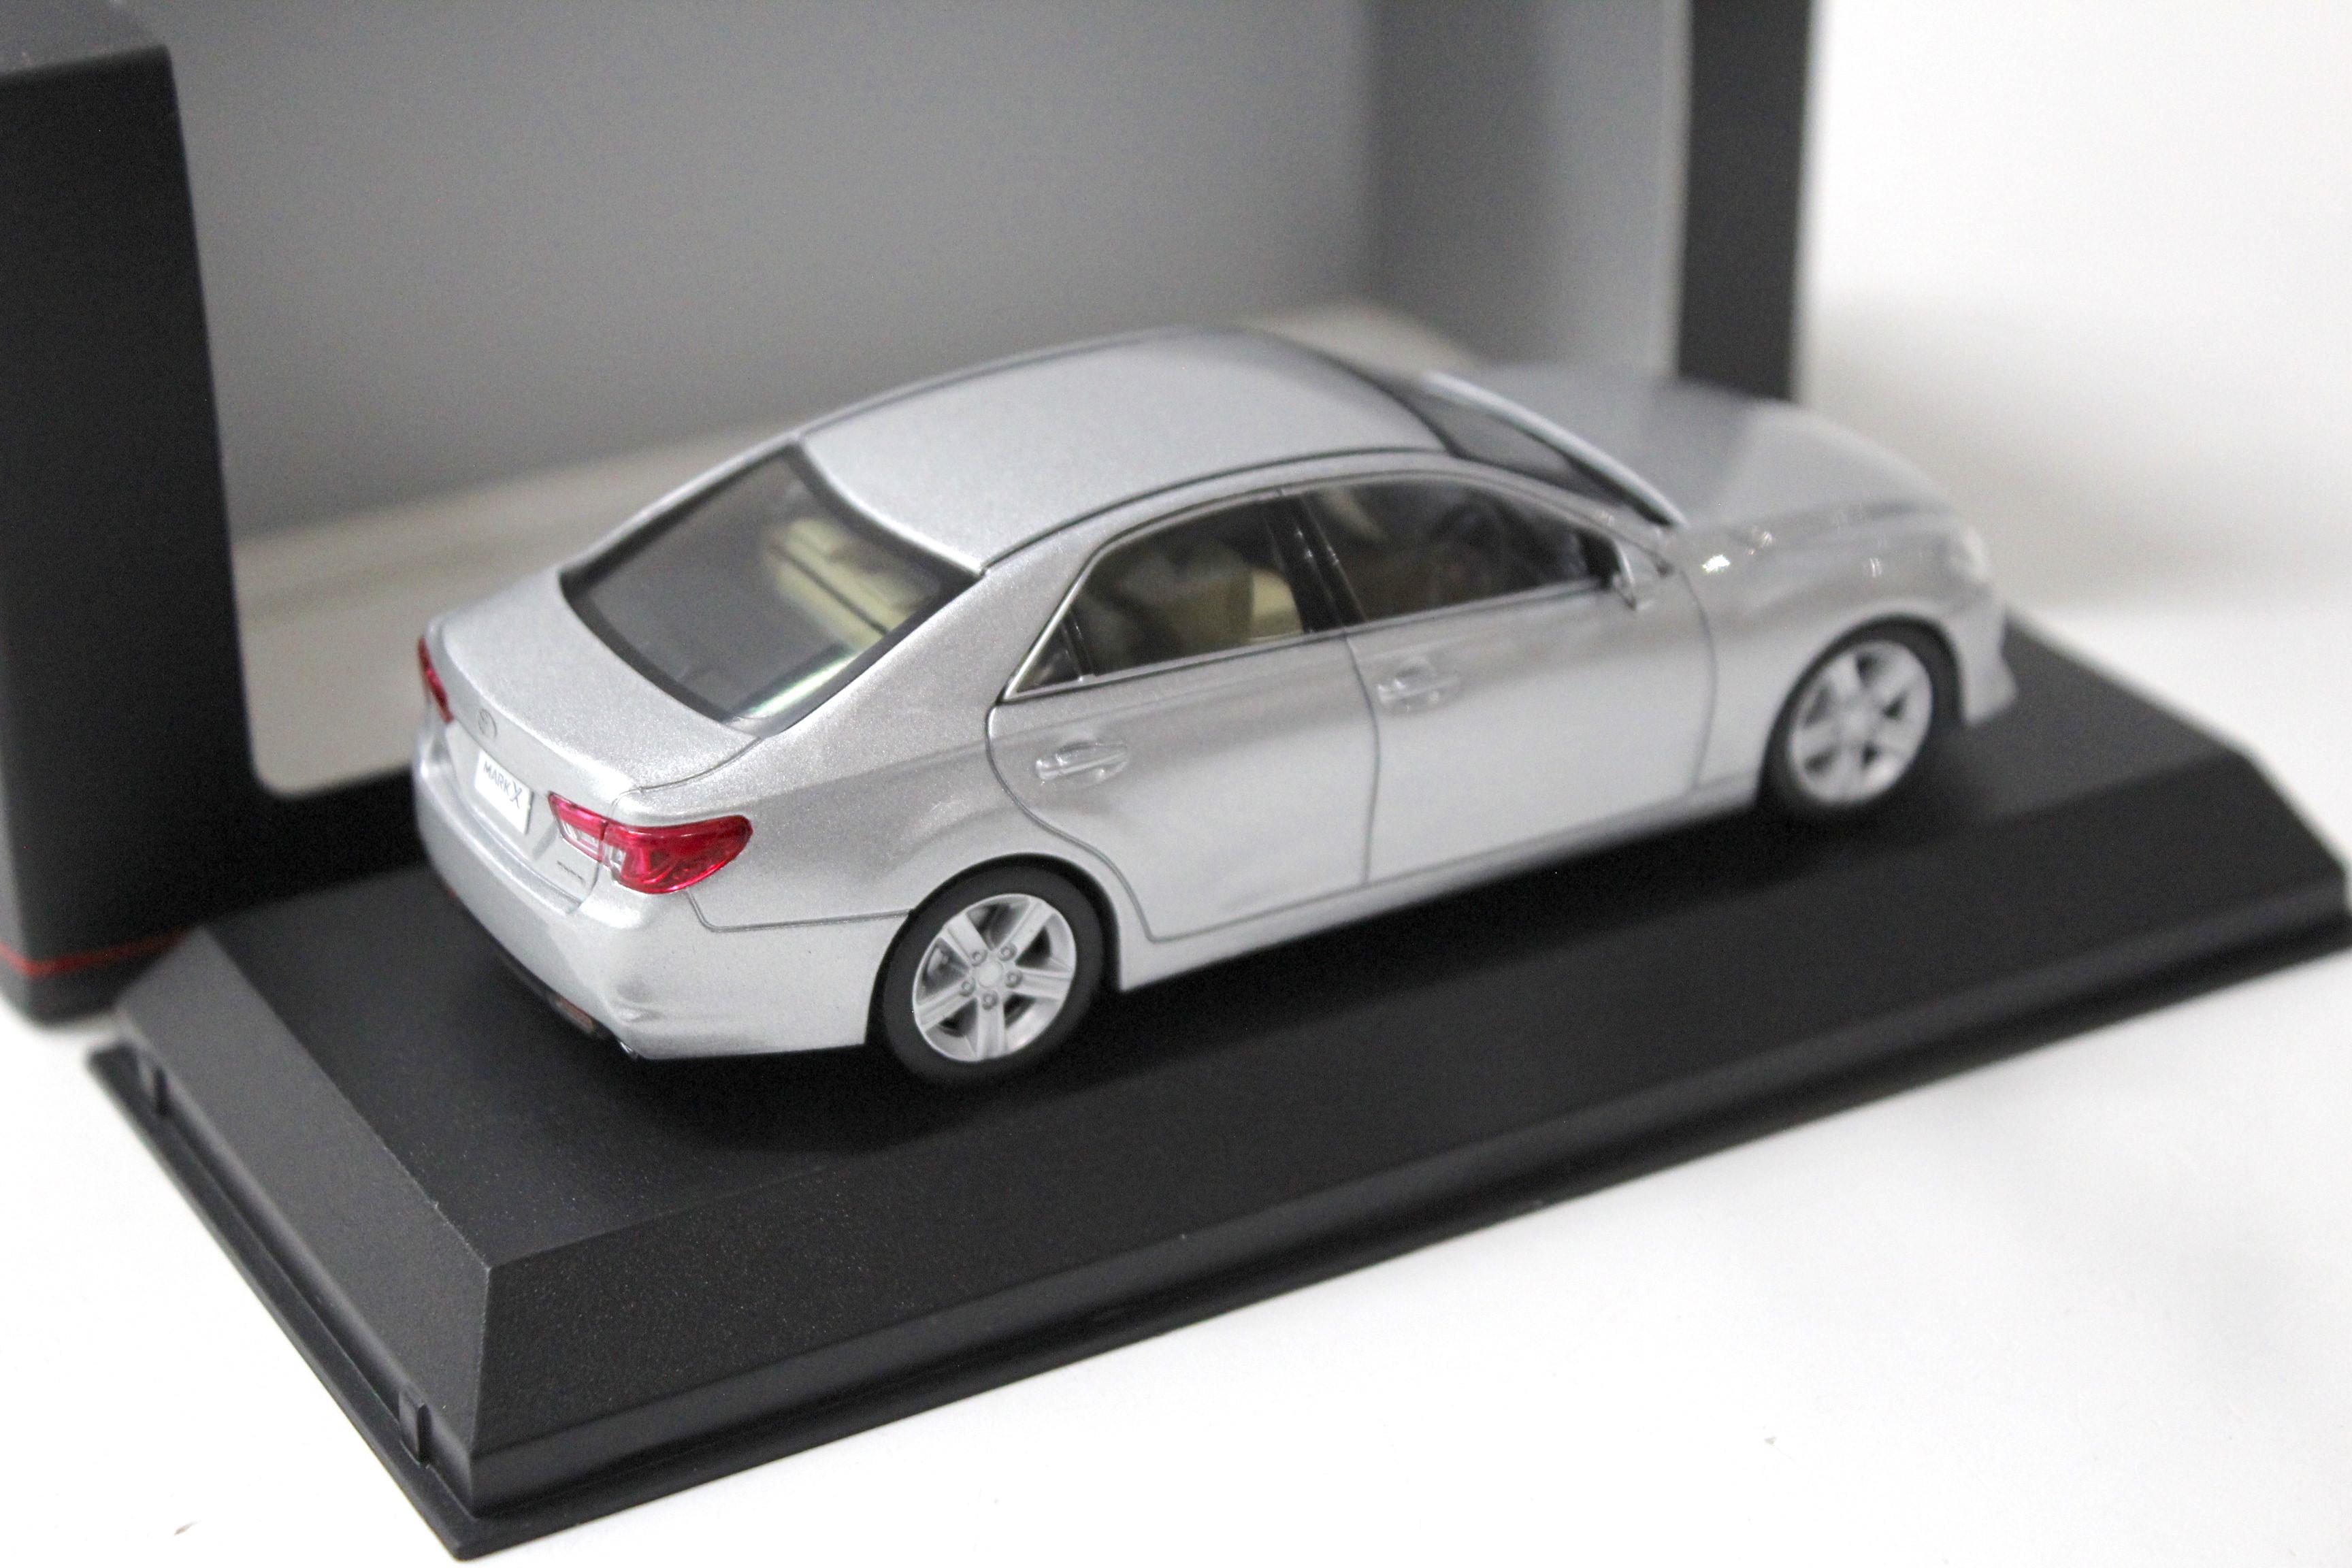 1:43 Kyosho Toyota MARK X 250G (Late) "F Package" Limousine silver